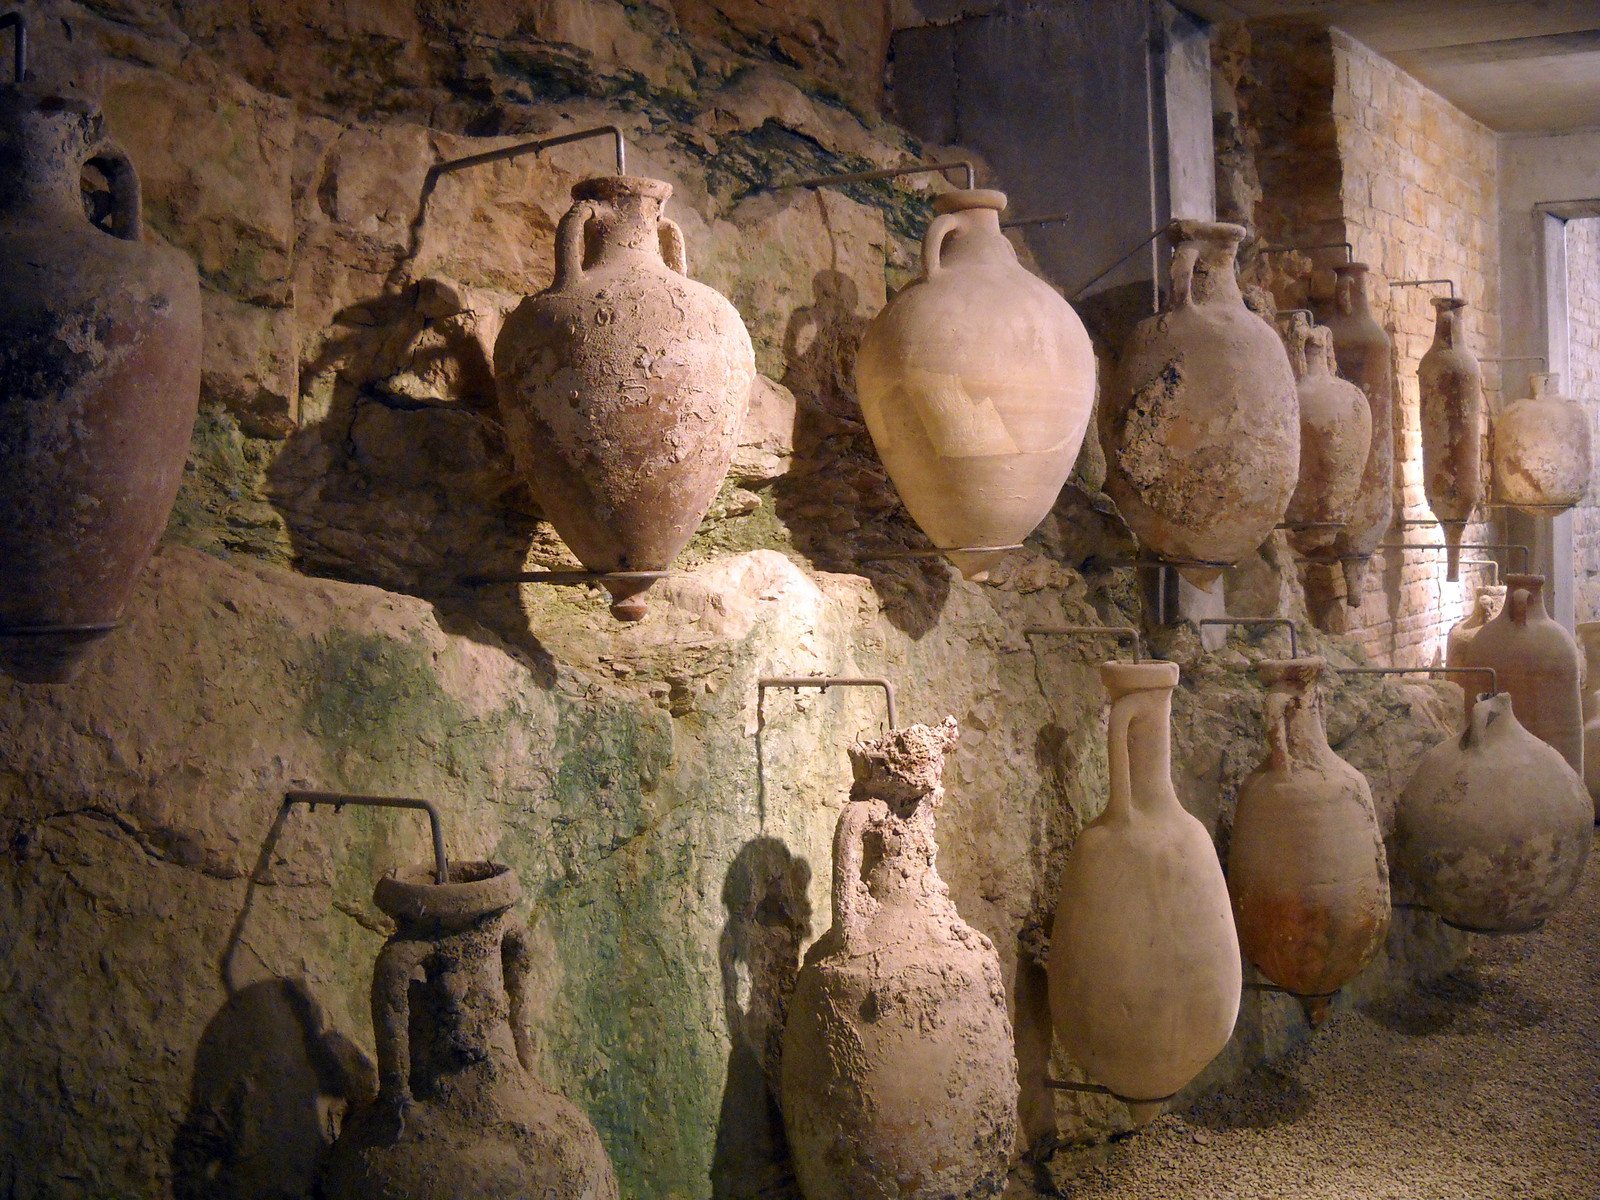 a bunch of ceramic pots lined up on the side of a stone wall